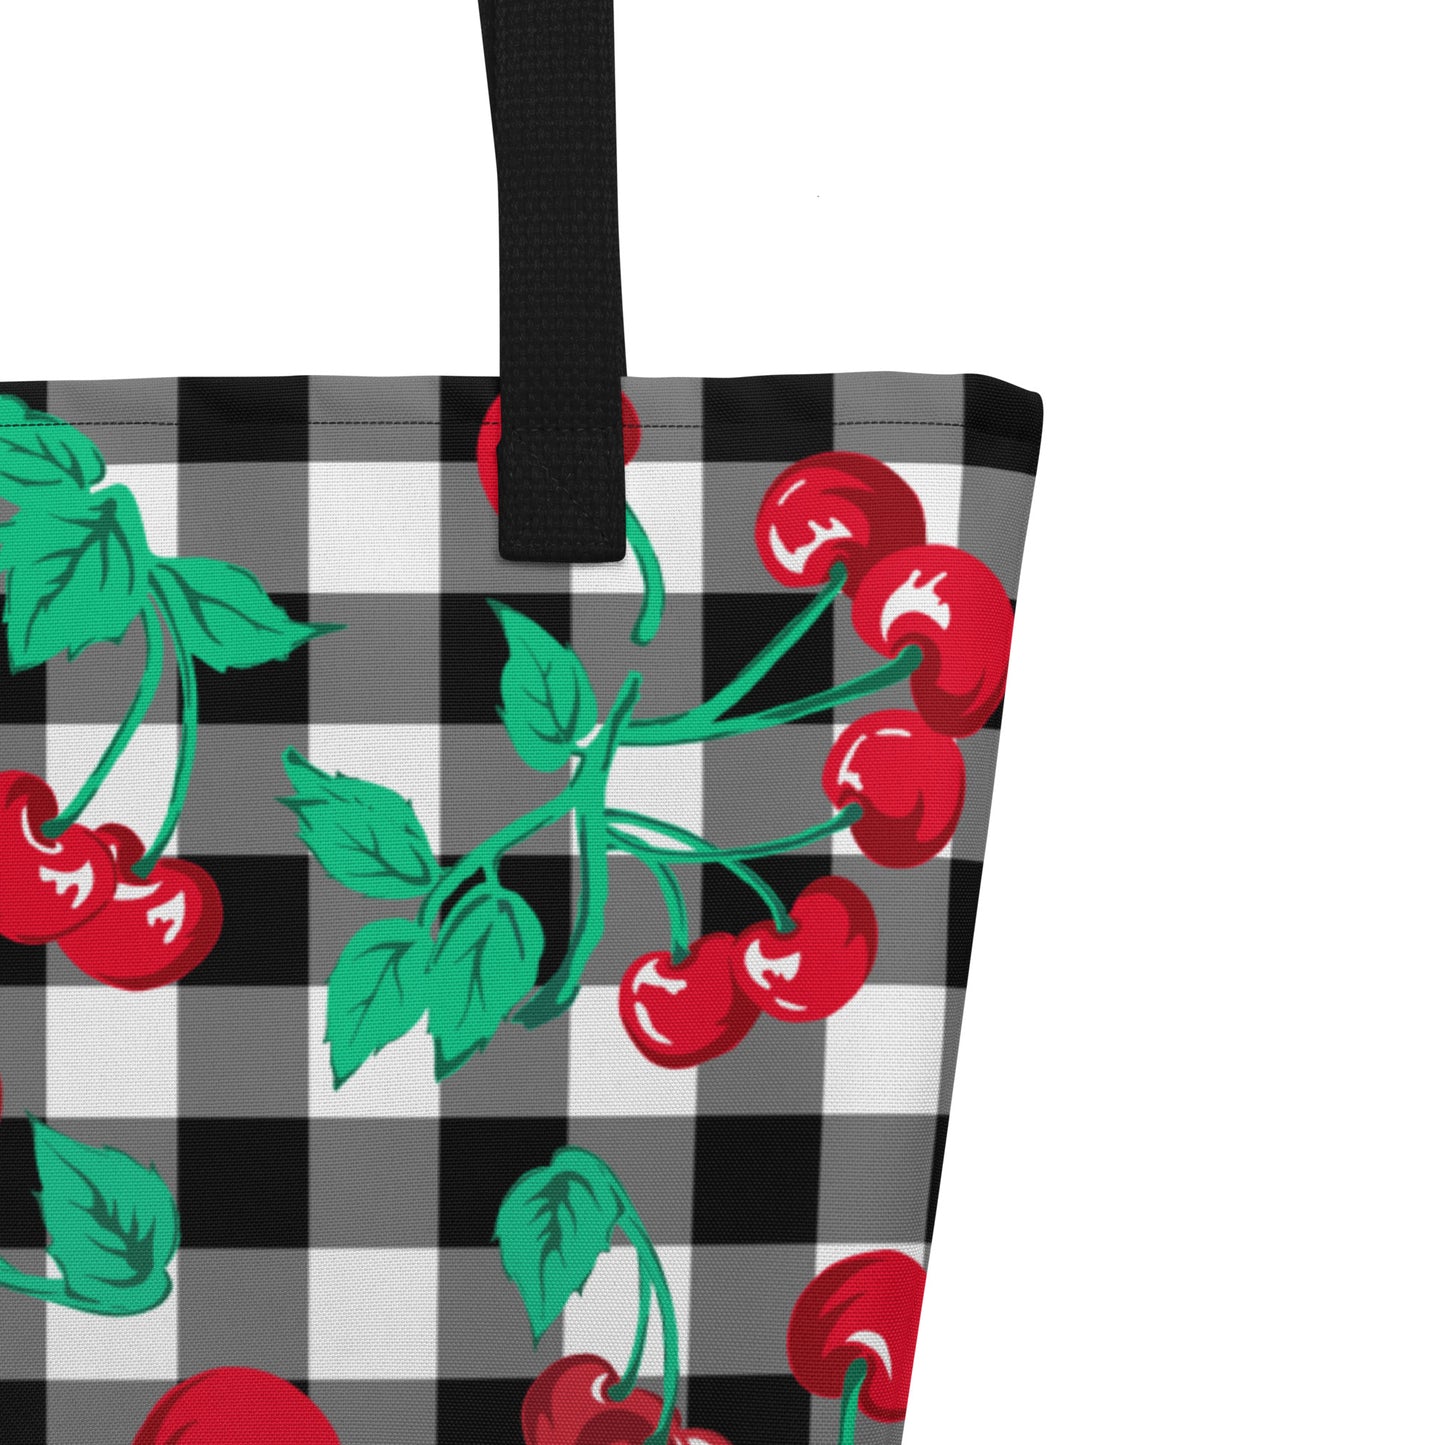 Bethany Cherry Girl Black Gingham Print Oversized Tote Bag | Pinup Couture Relaxed